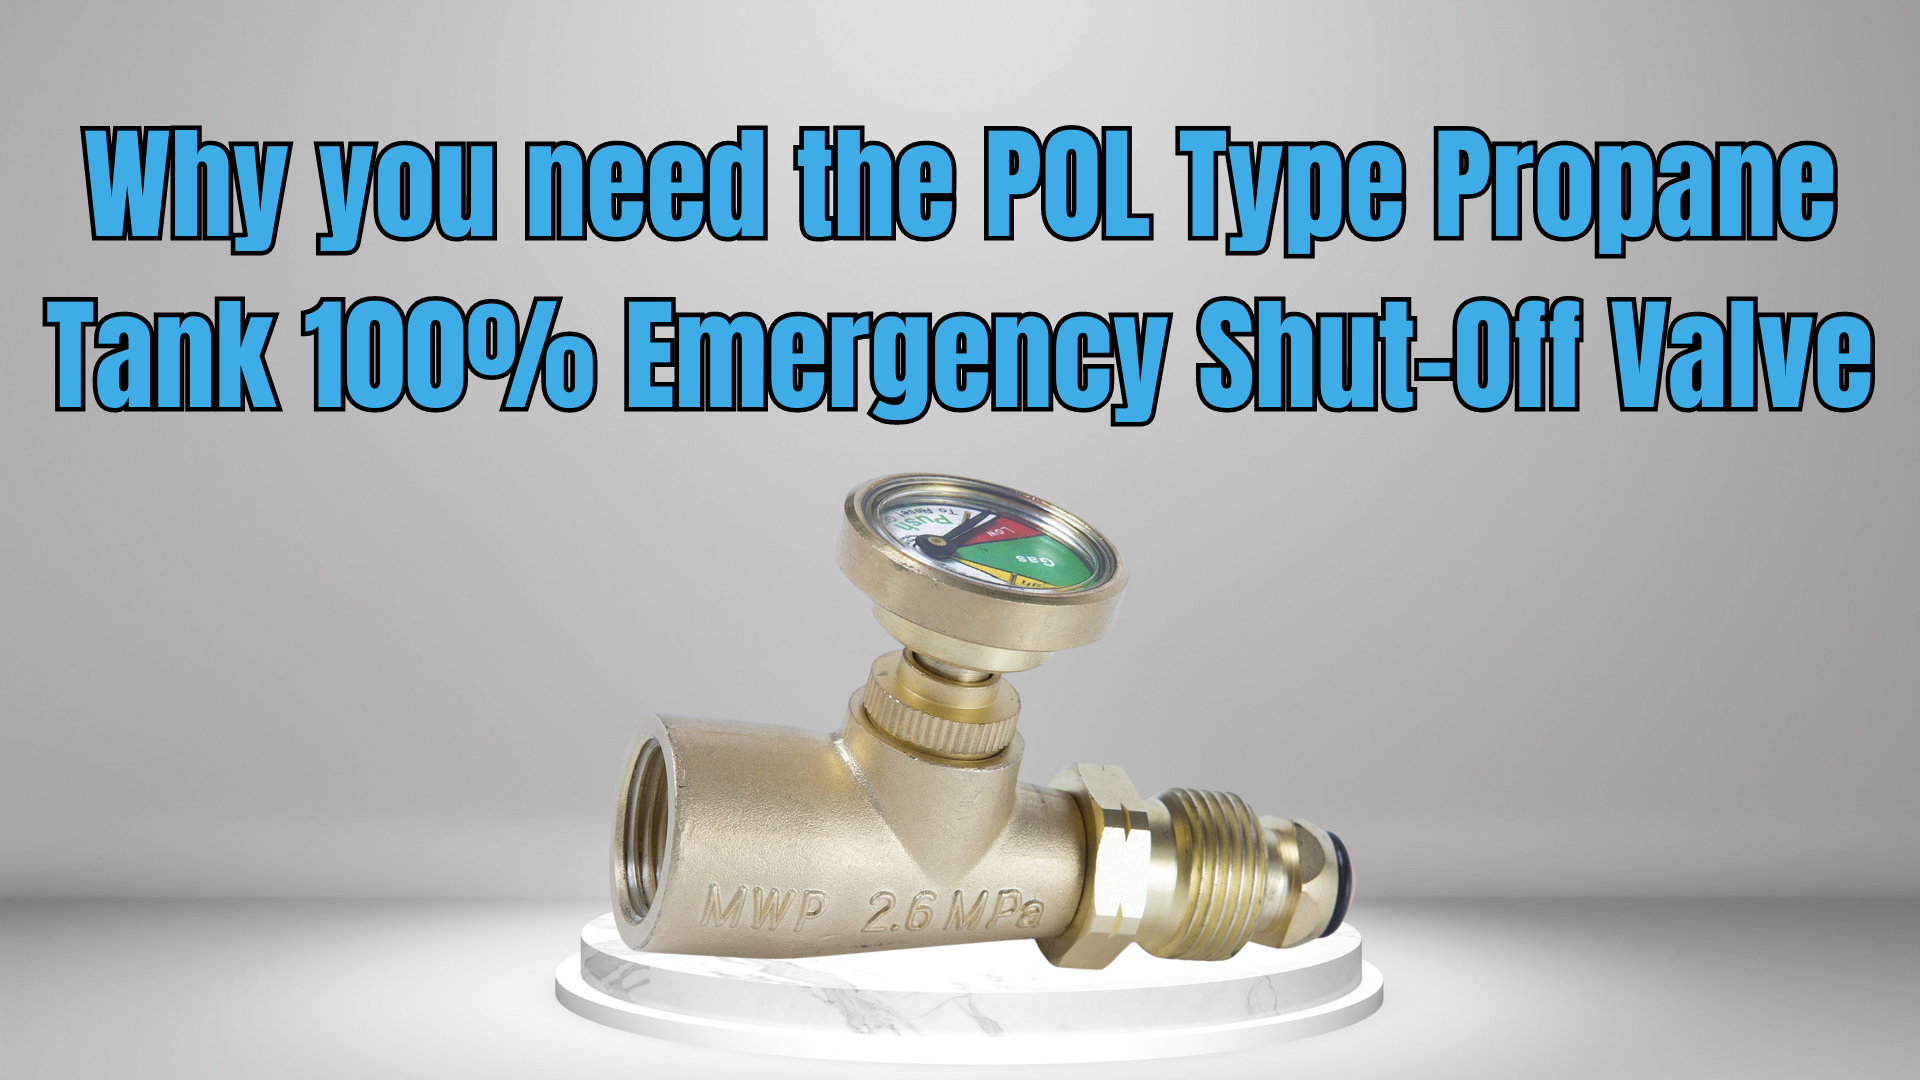 Why you need the POL Type Propane Tank 100% Emergency Shut-Off Valve